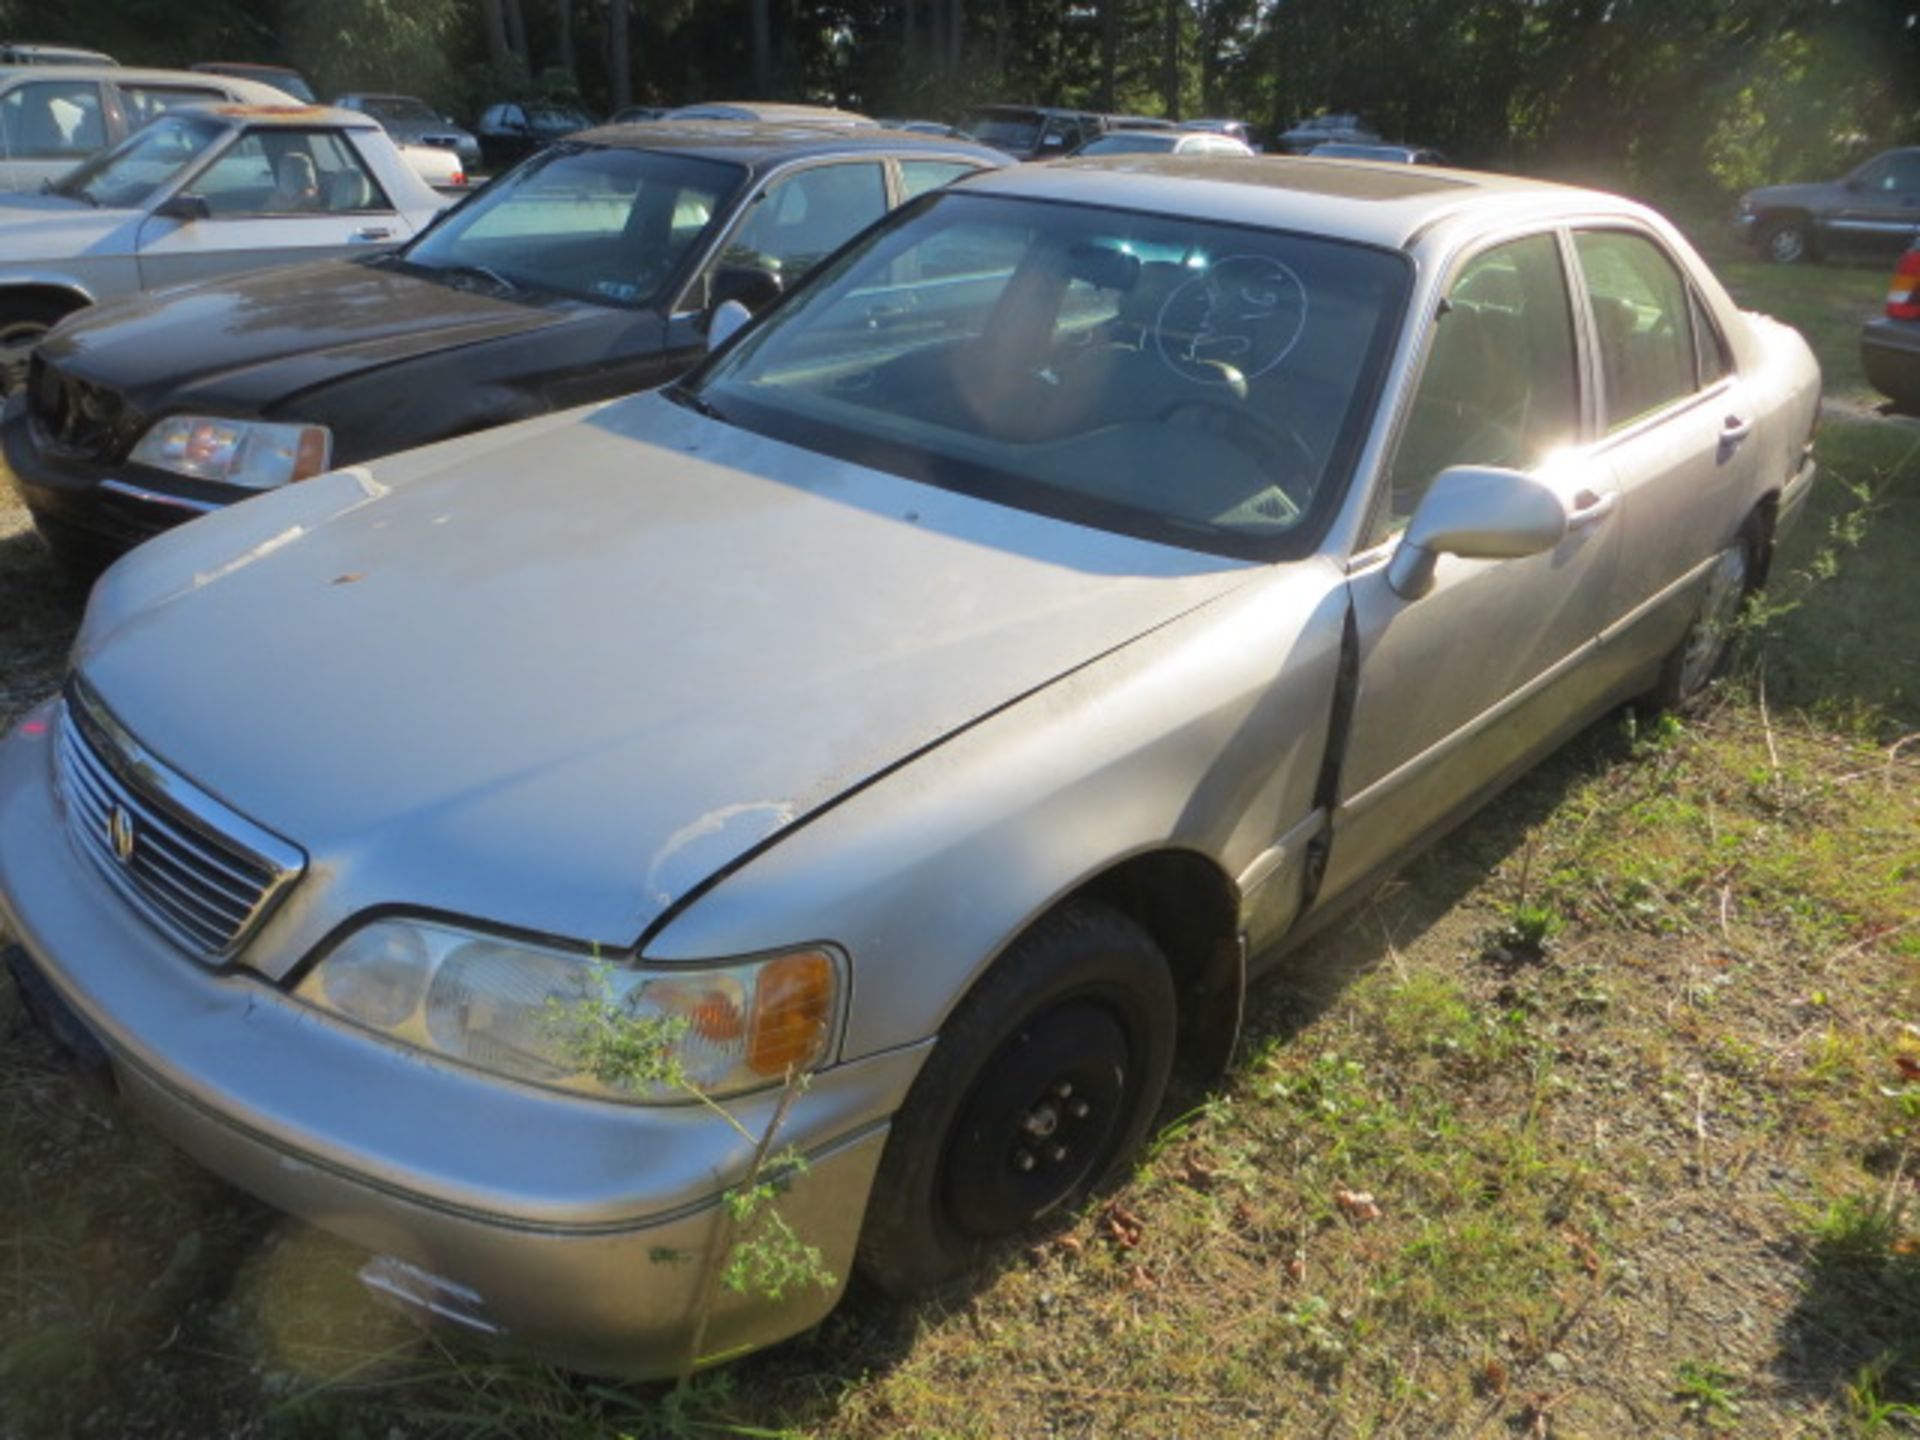 1998 Acura RL 112000 MILES,VIN JH4KA9679WC007565, SOLD WITH GOOD TRANSFERABLE TITLE, ALL VEHICLES - Image 2 of 3